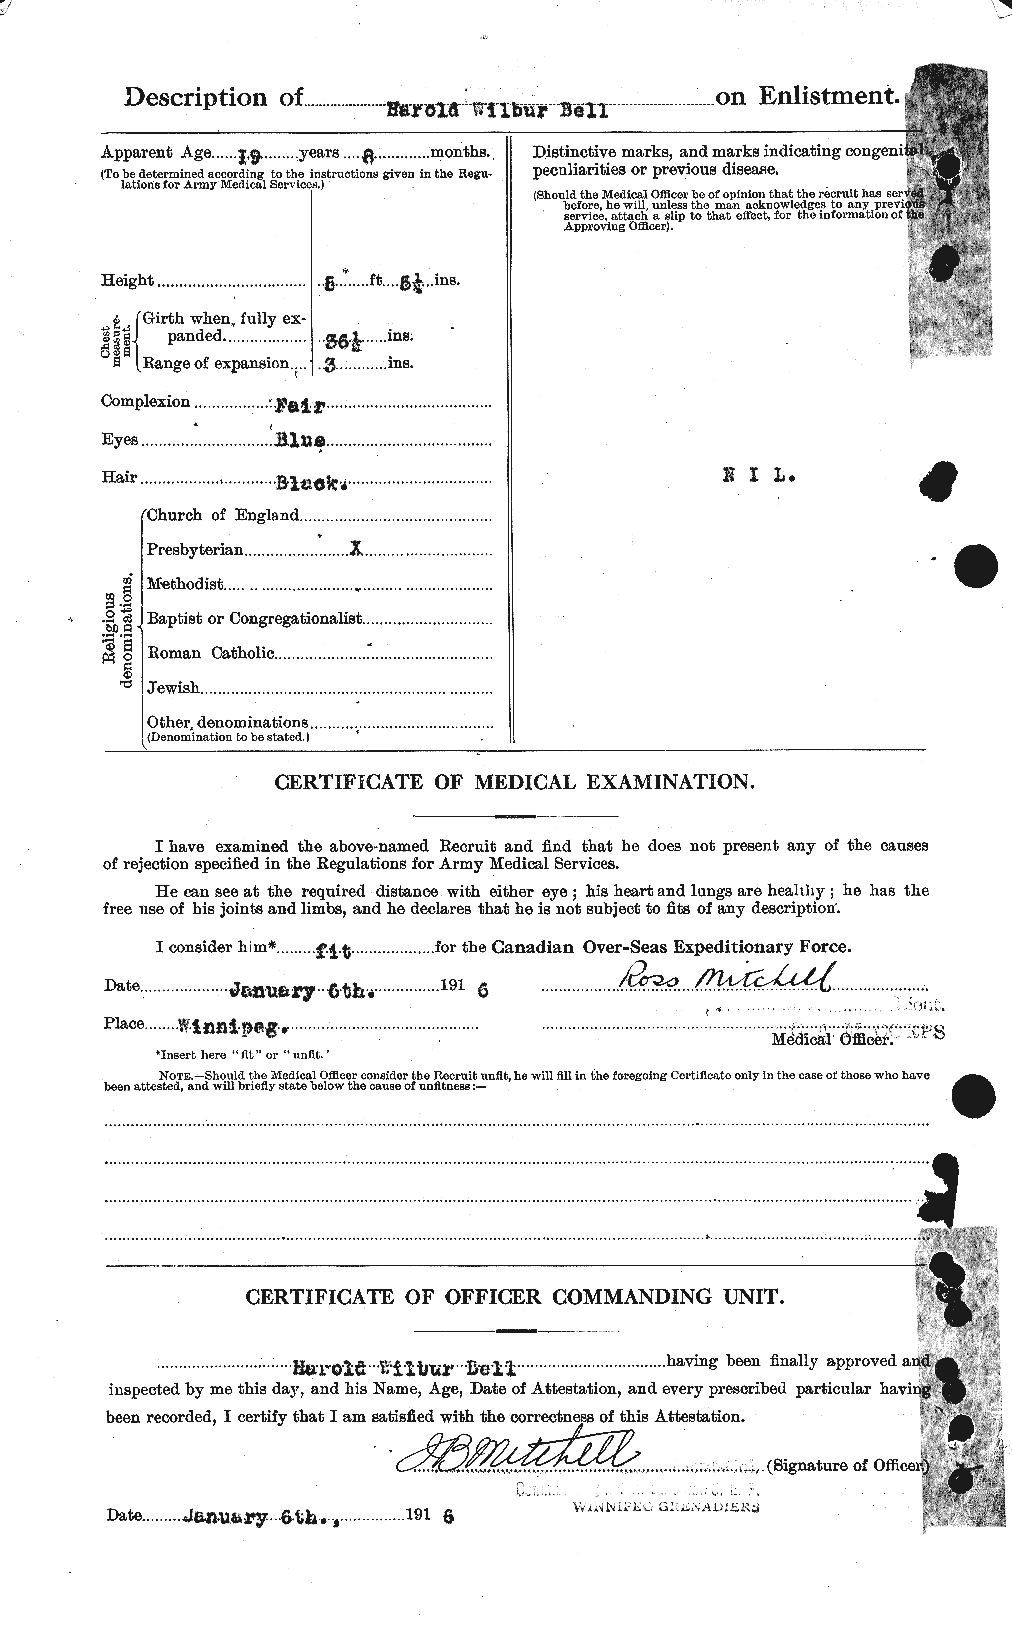 Personnel Records of the First World War - CEF 234231b